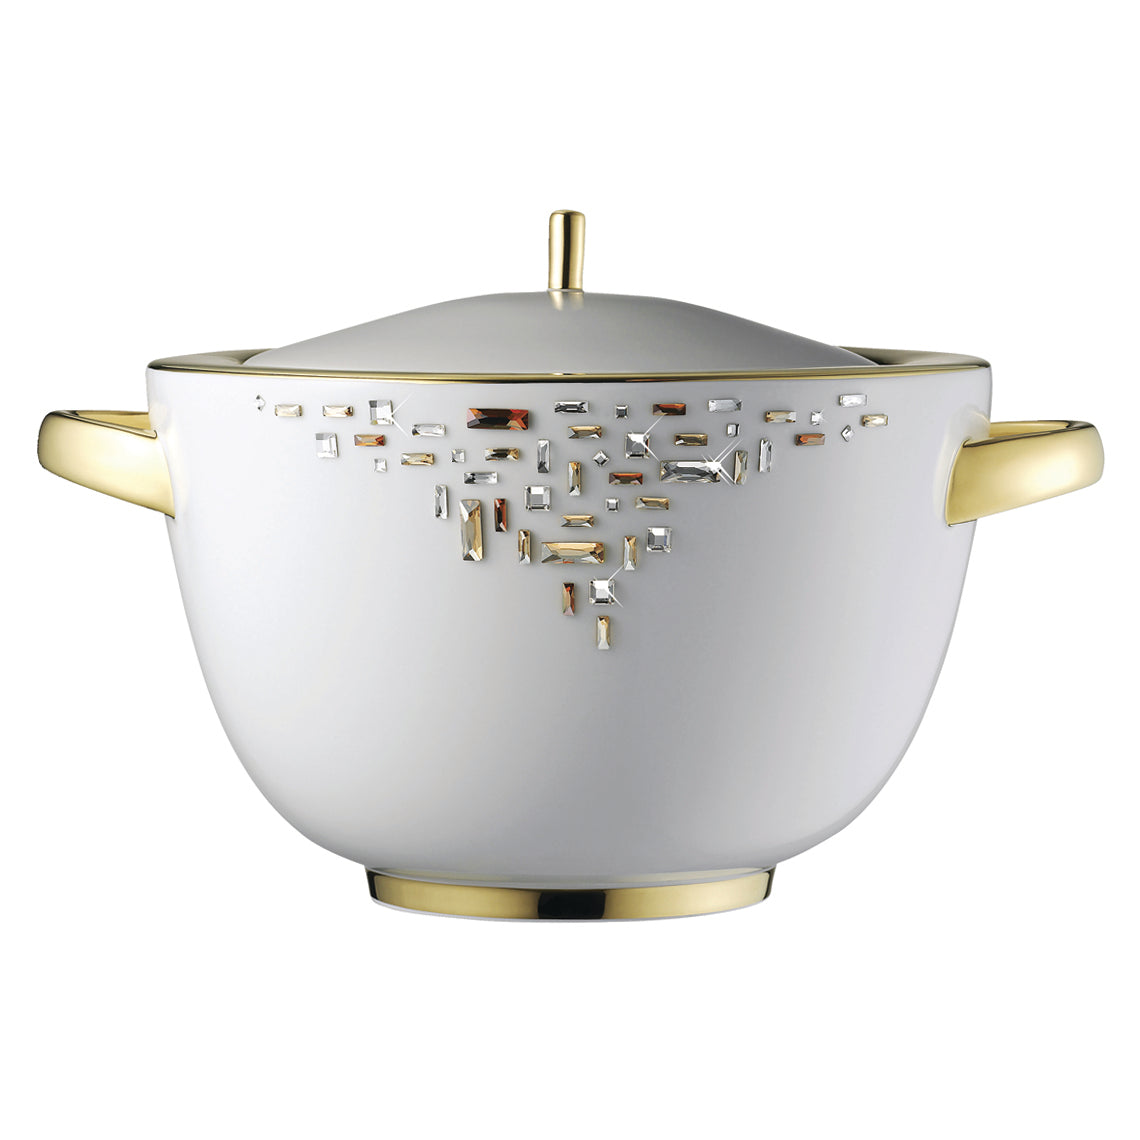 Prouna Diana Gold Covered Vegetable Bowl / Soup Tureen White Background Photo